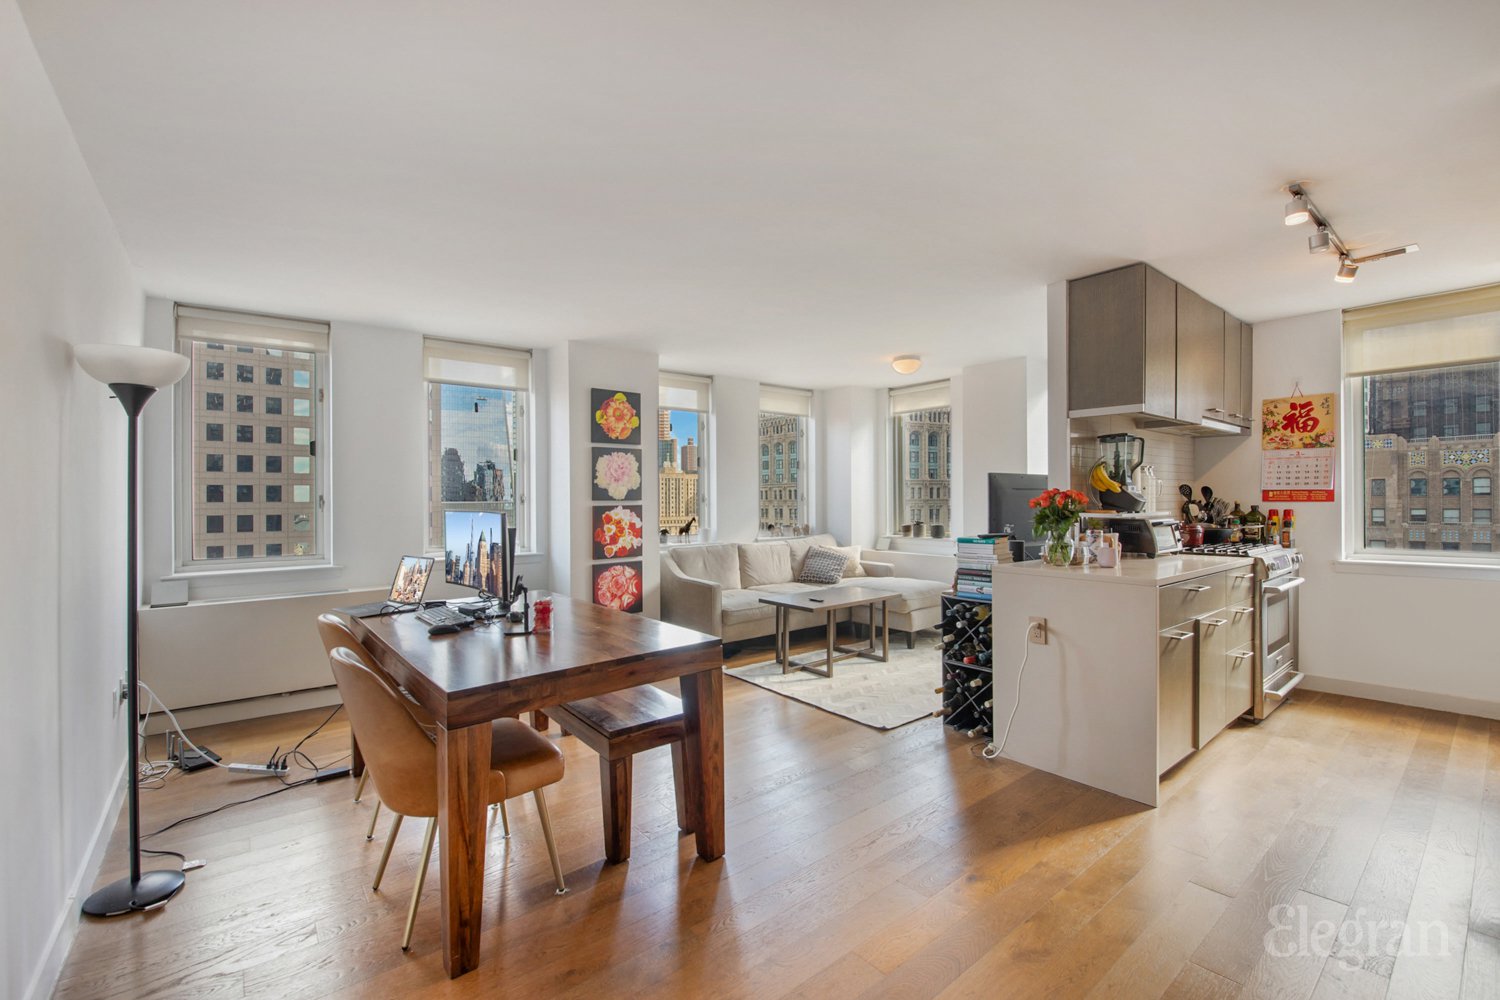 225 Rector Place 22-B, Battery Park City, Downtown, NYC - 2 Bedrooms  
2 Bathrooms  
4 Rooms - 